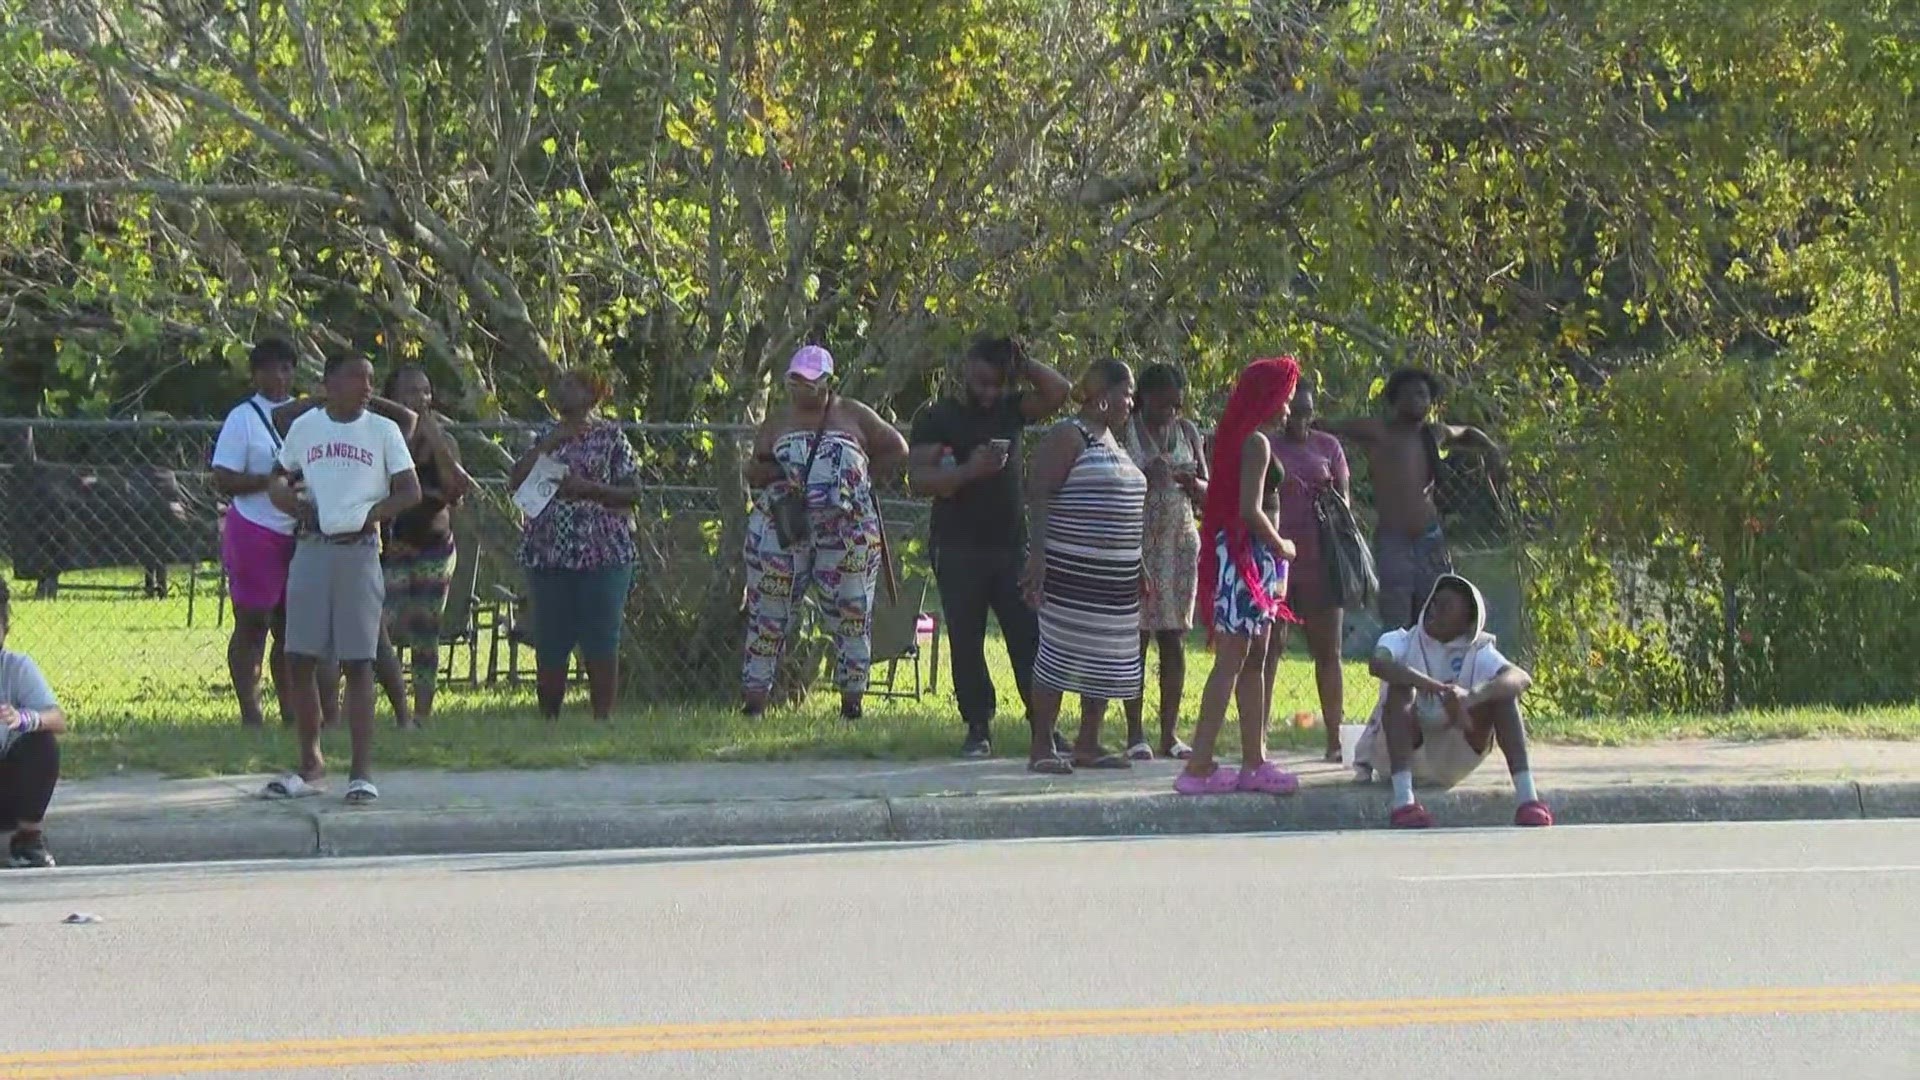 Residents in the area were shocked to hear about the shooting.